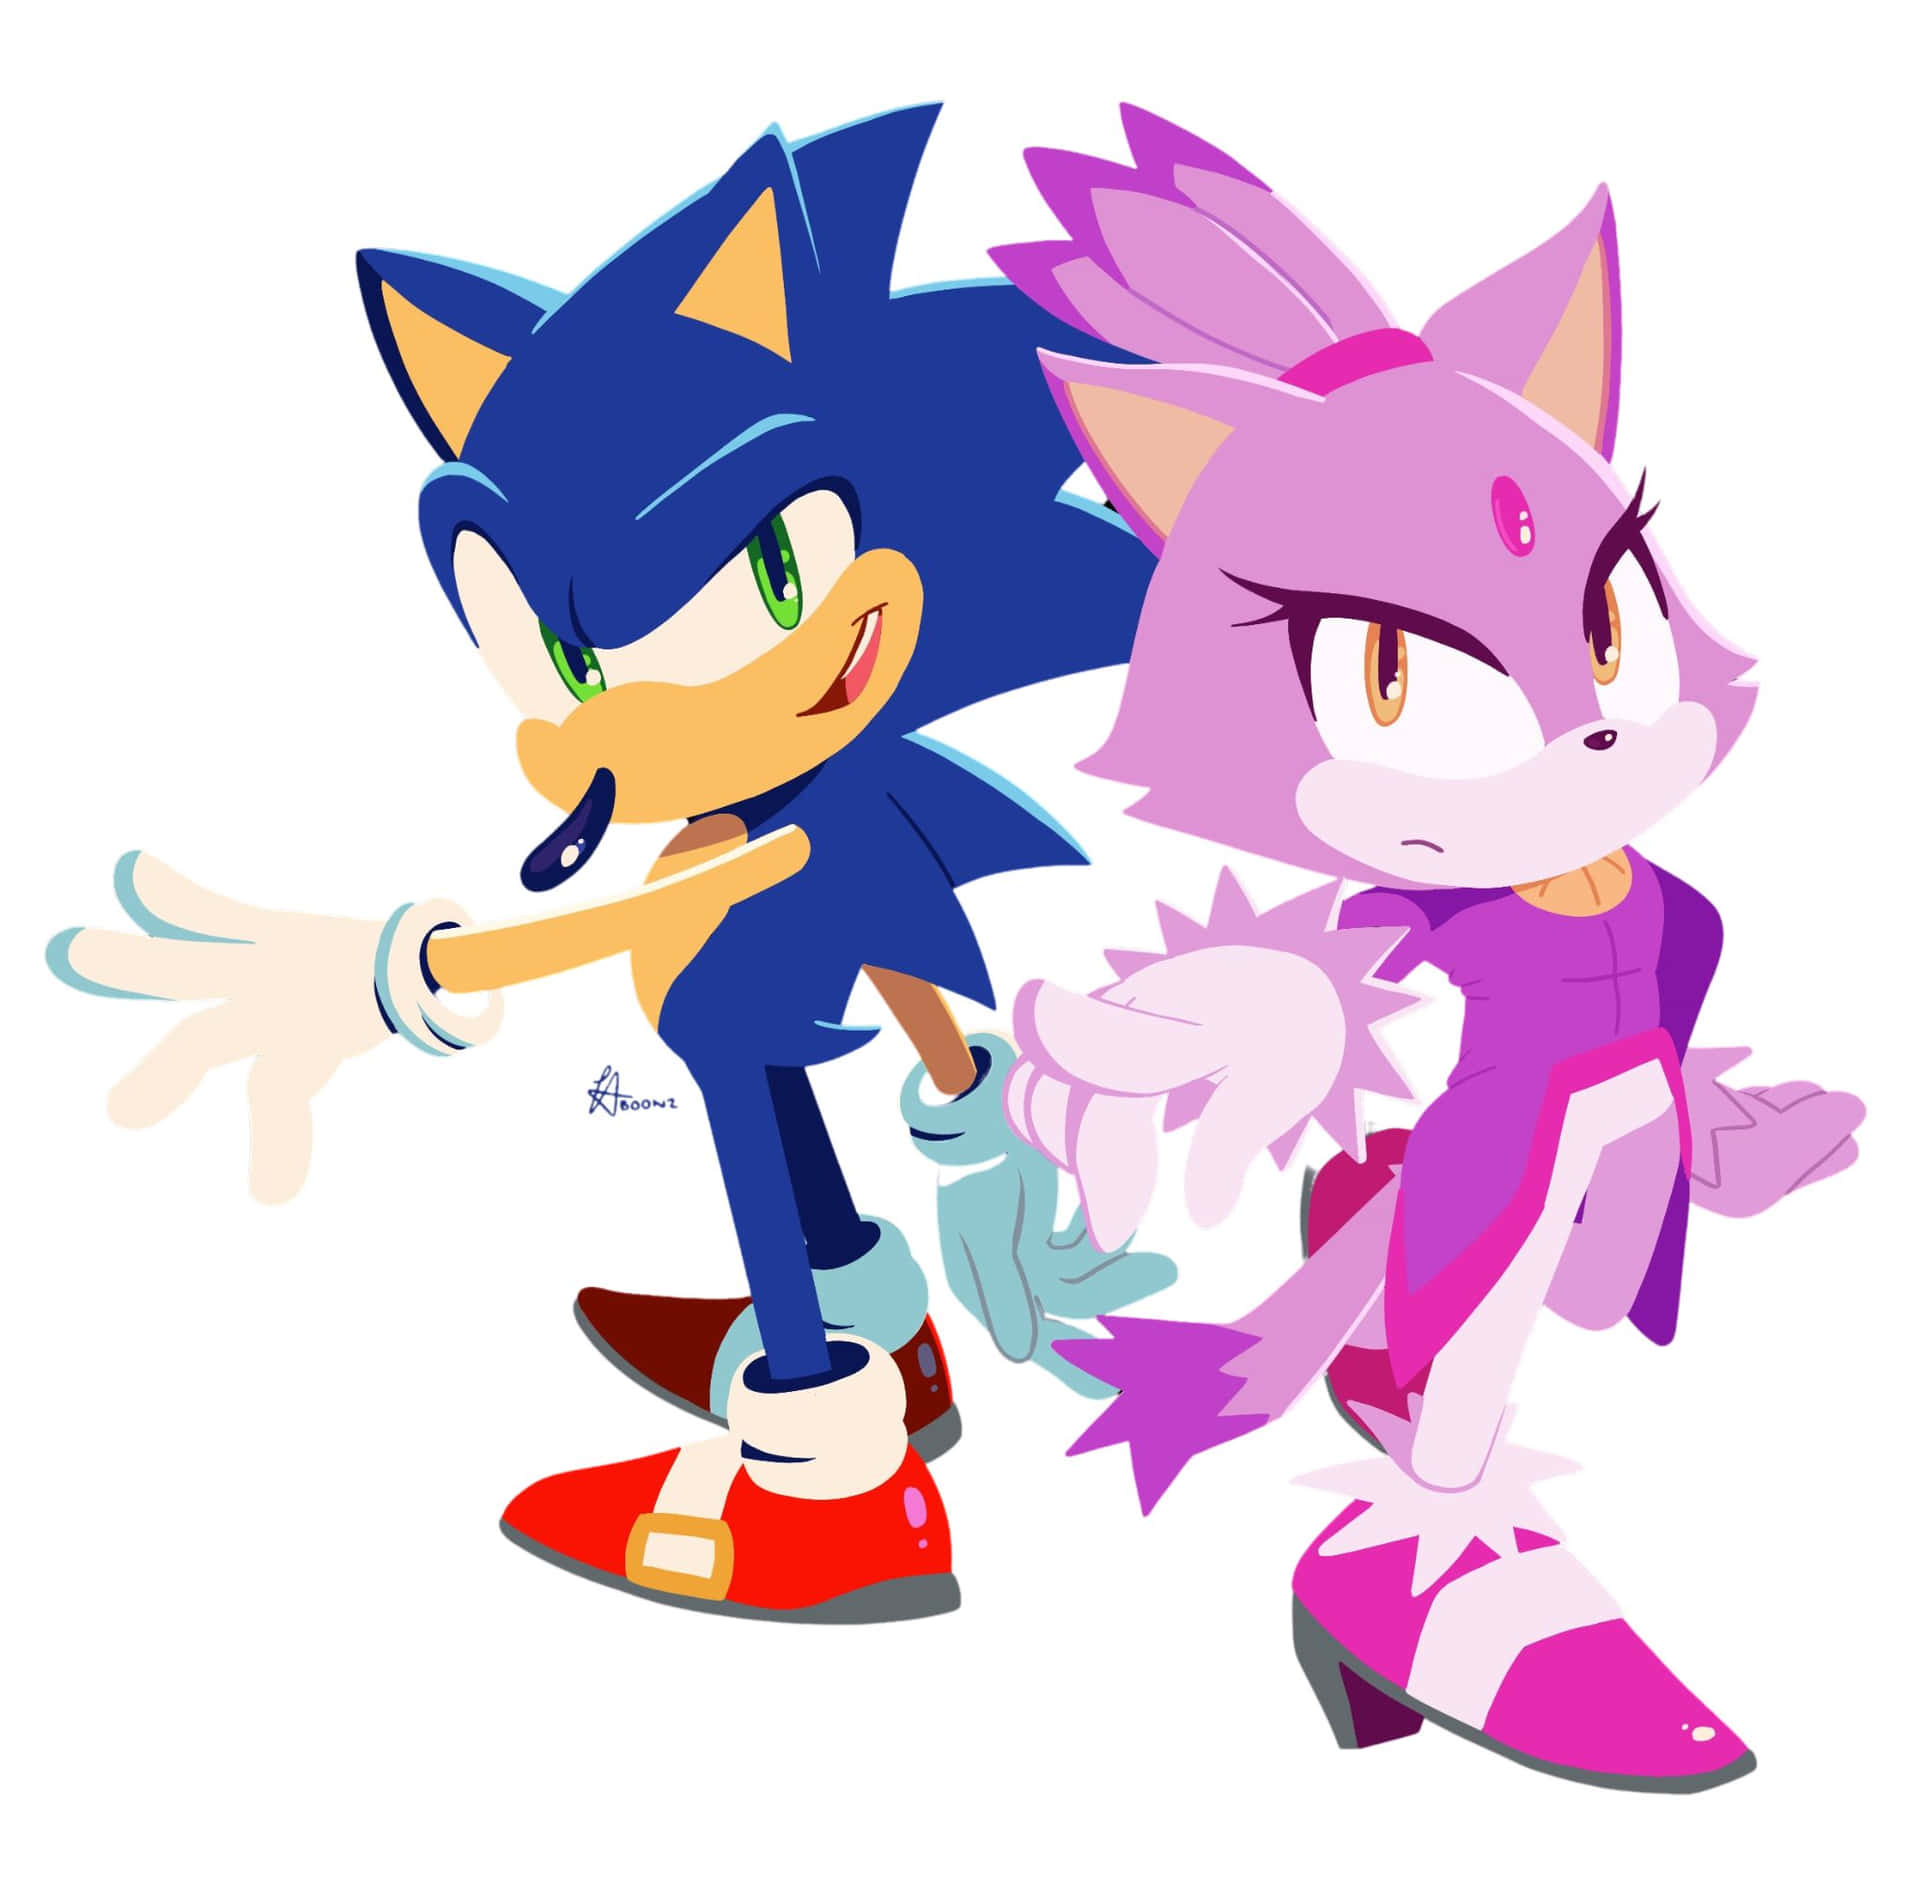 Sonic and Blaze in Action Wallpaper